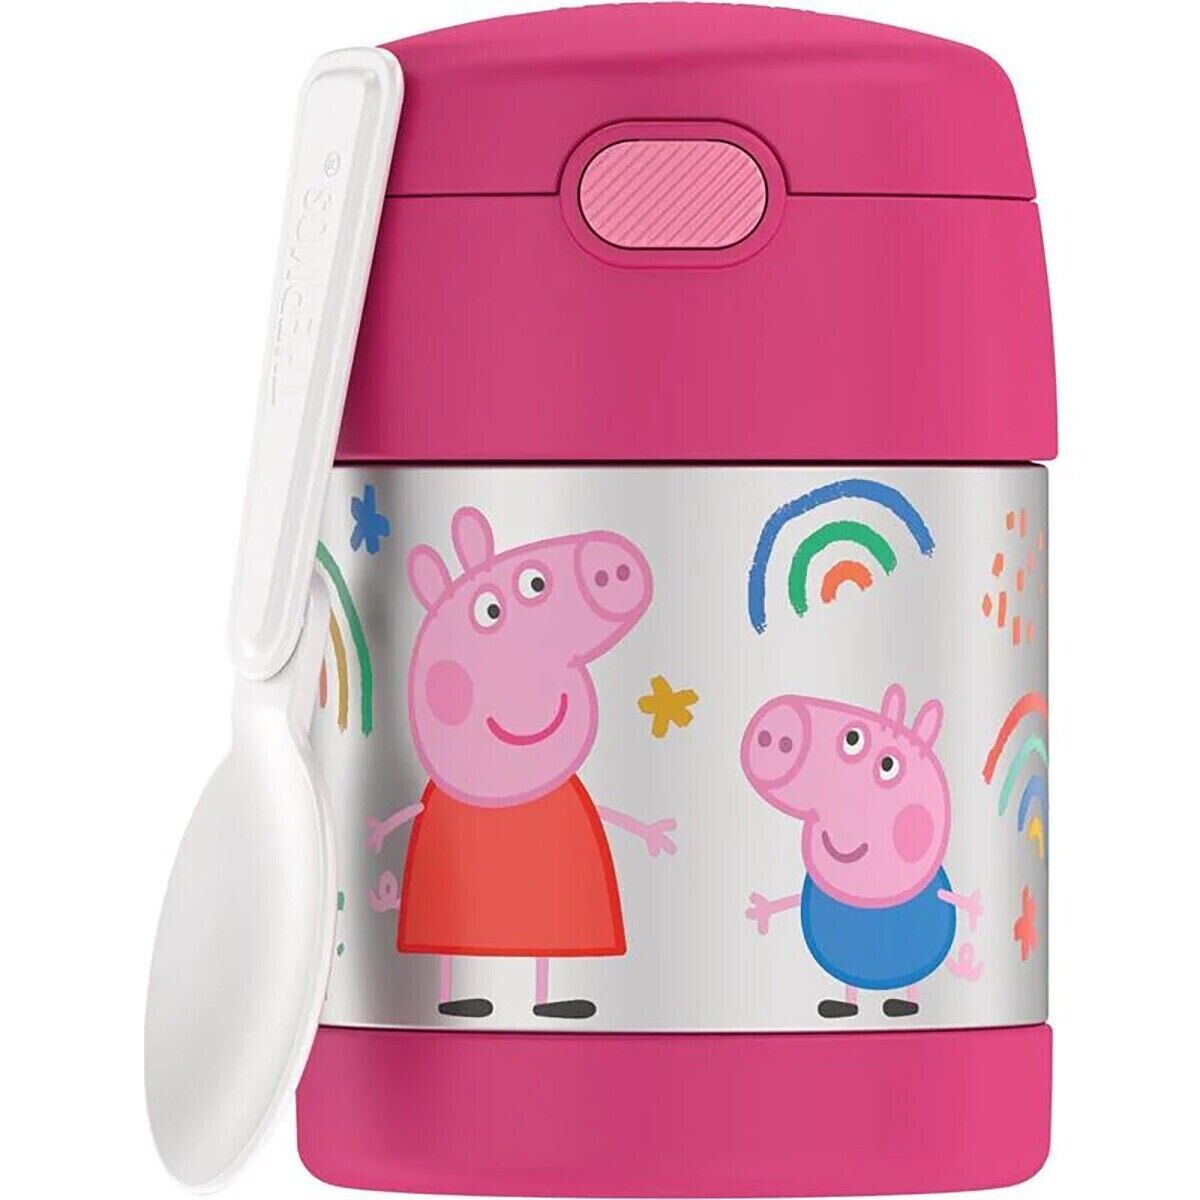 Primary image for Thermos 10 oz. Kid's Funtainer Stainless Steel Food Jar w/ Spoon - Peppa Pig